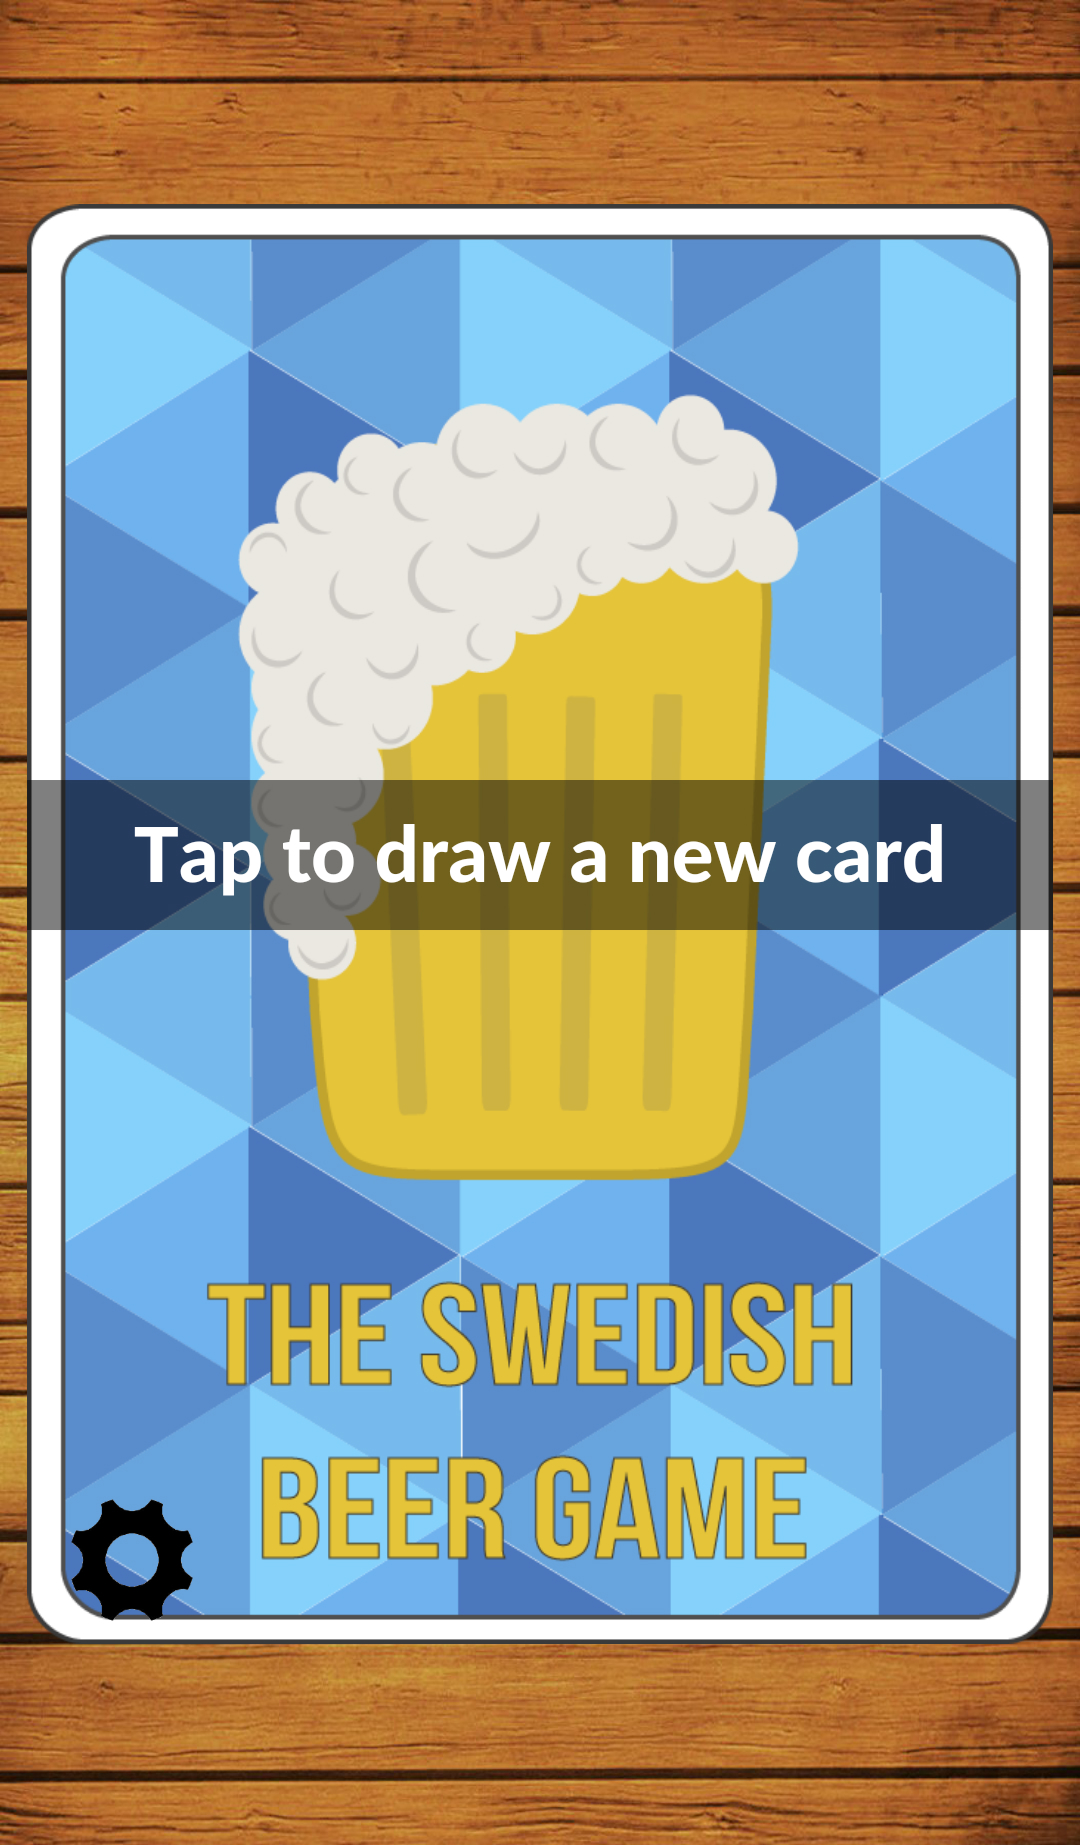 The Swedish Beer Game Android - Mod DB